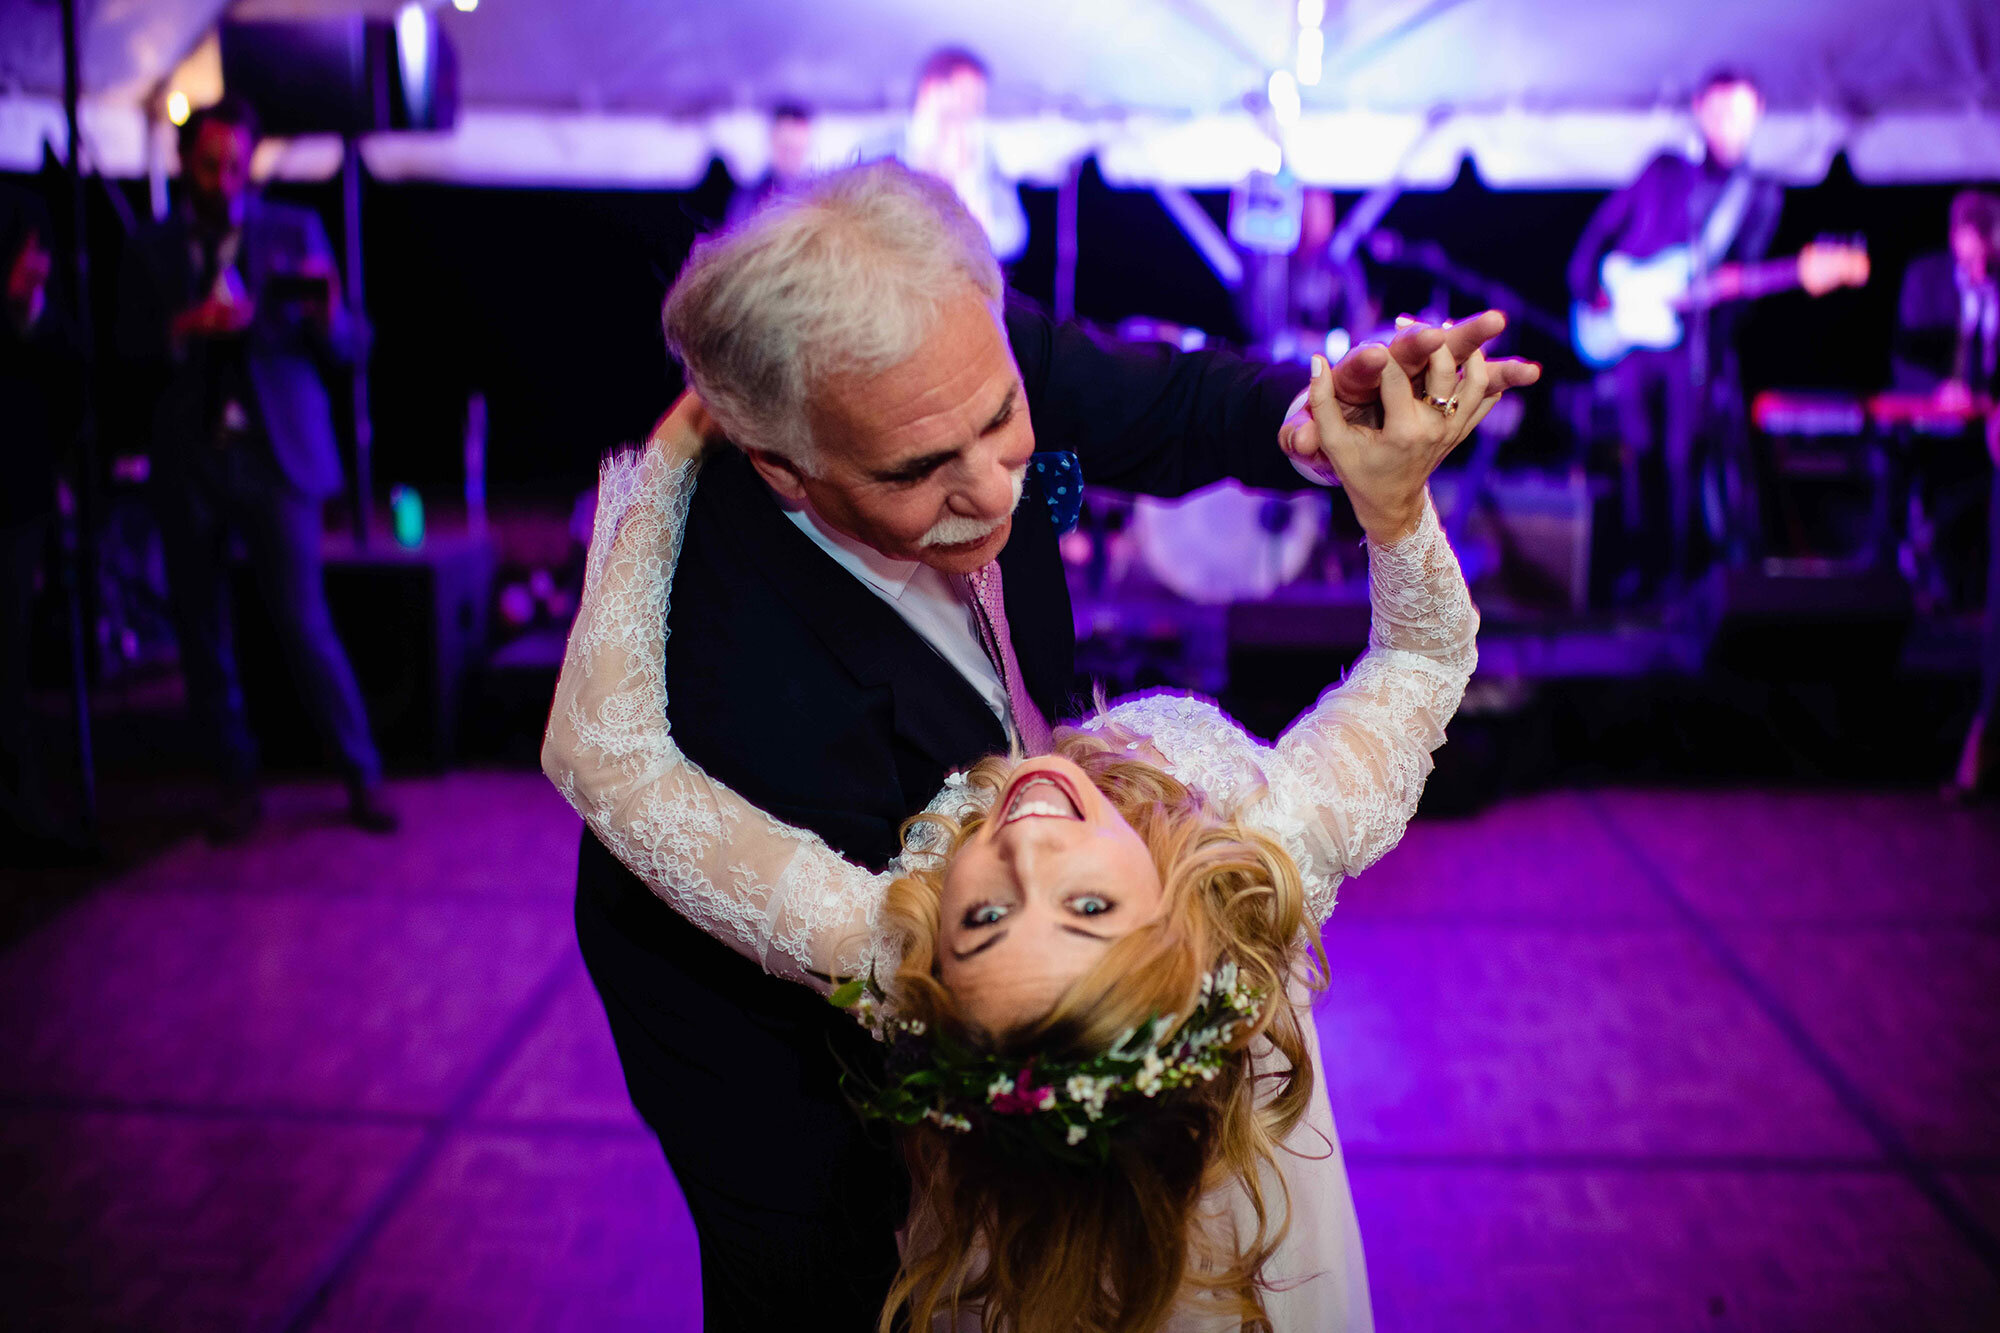 Newlywed shares dance with father during wedding reception Teresa Johnson Connecticut Wedding Photographer